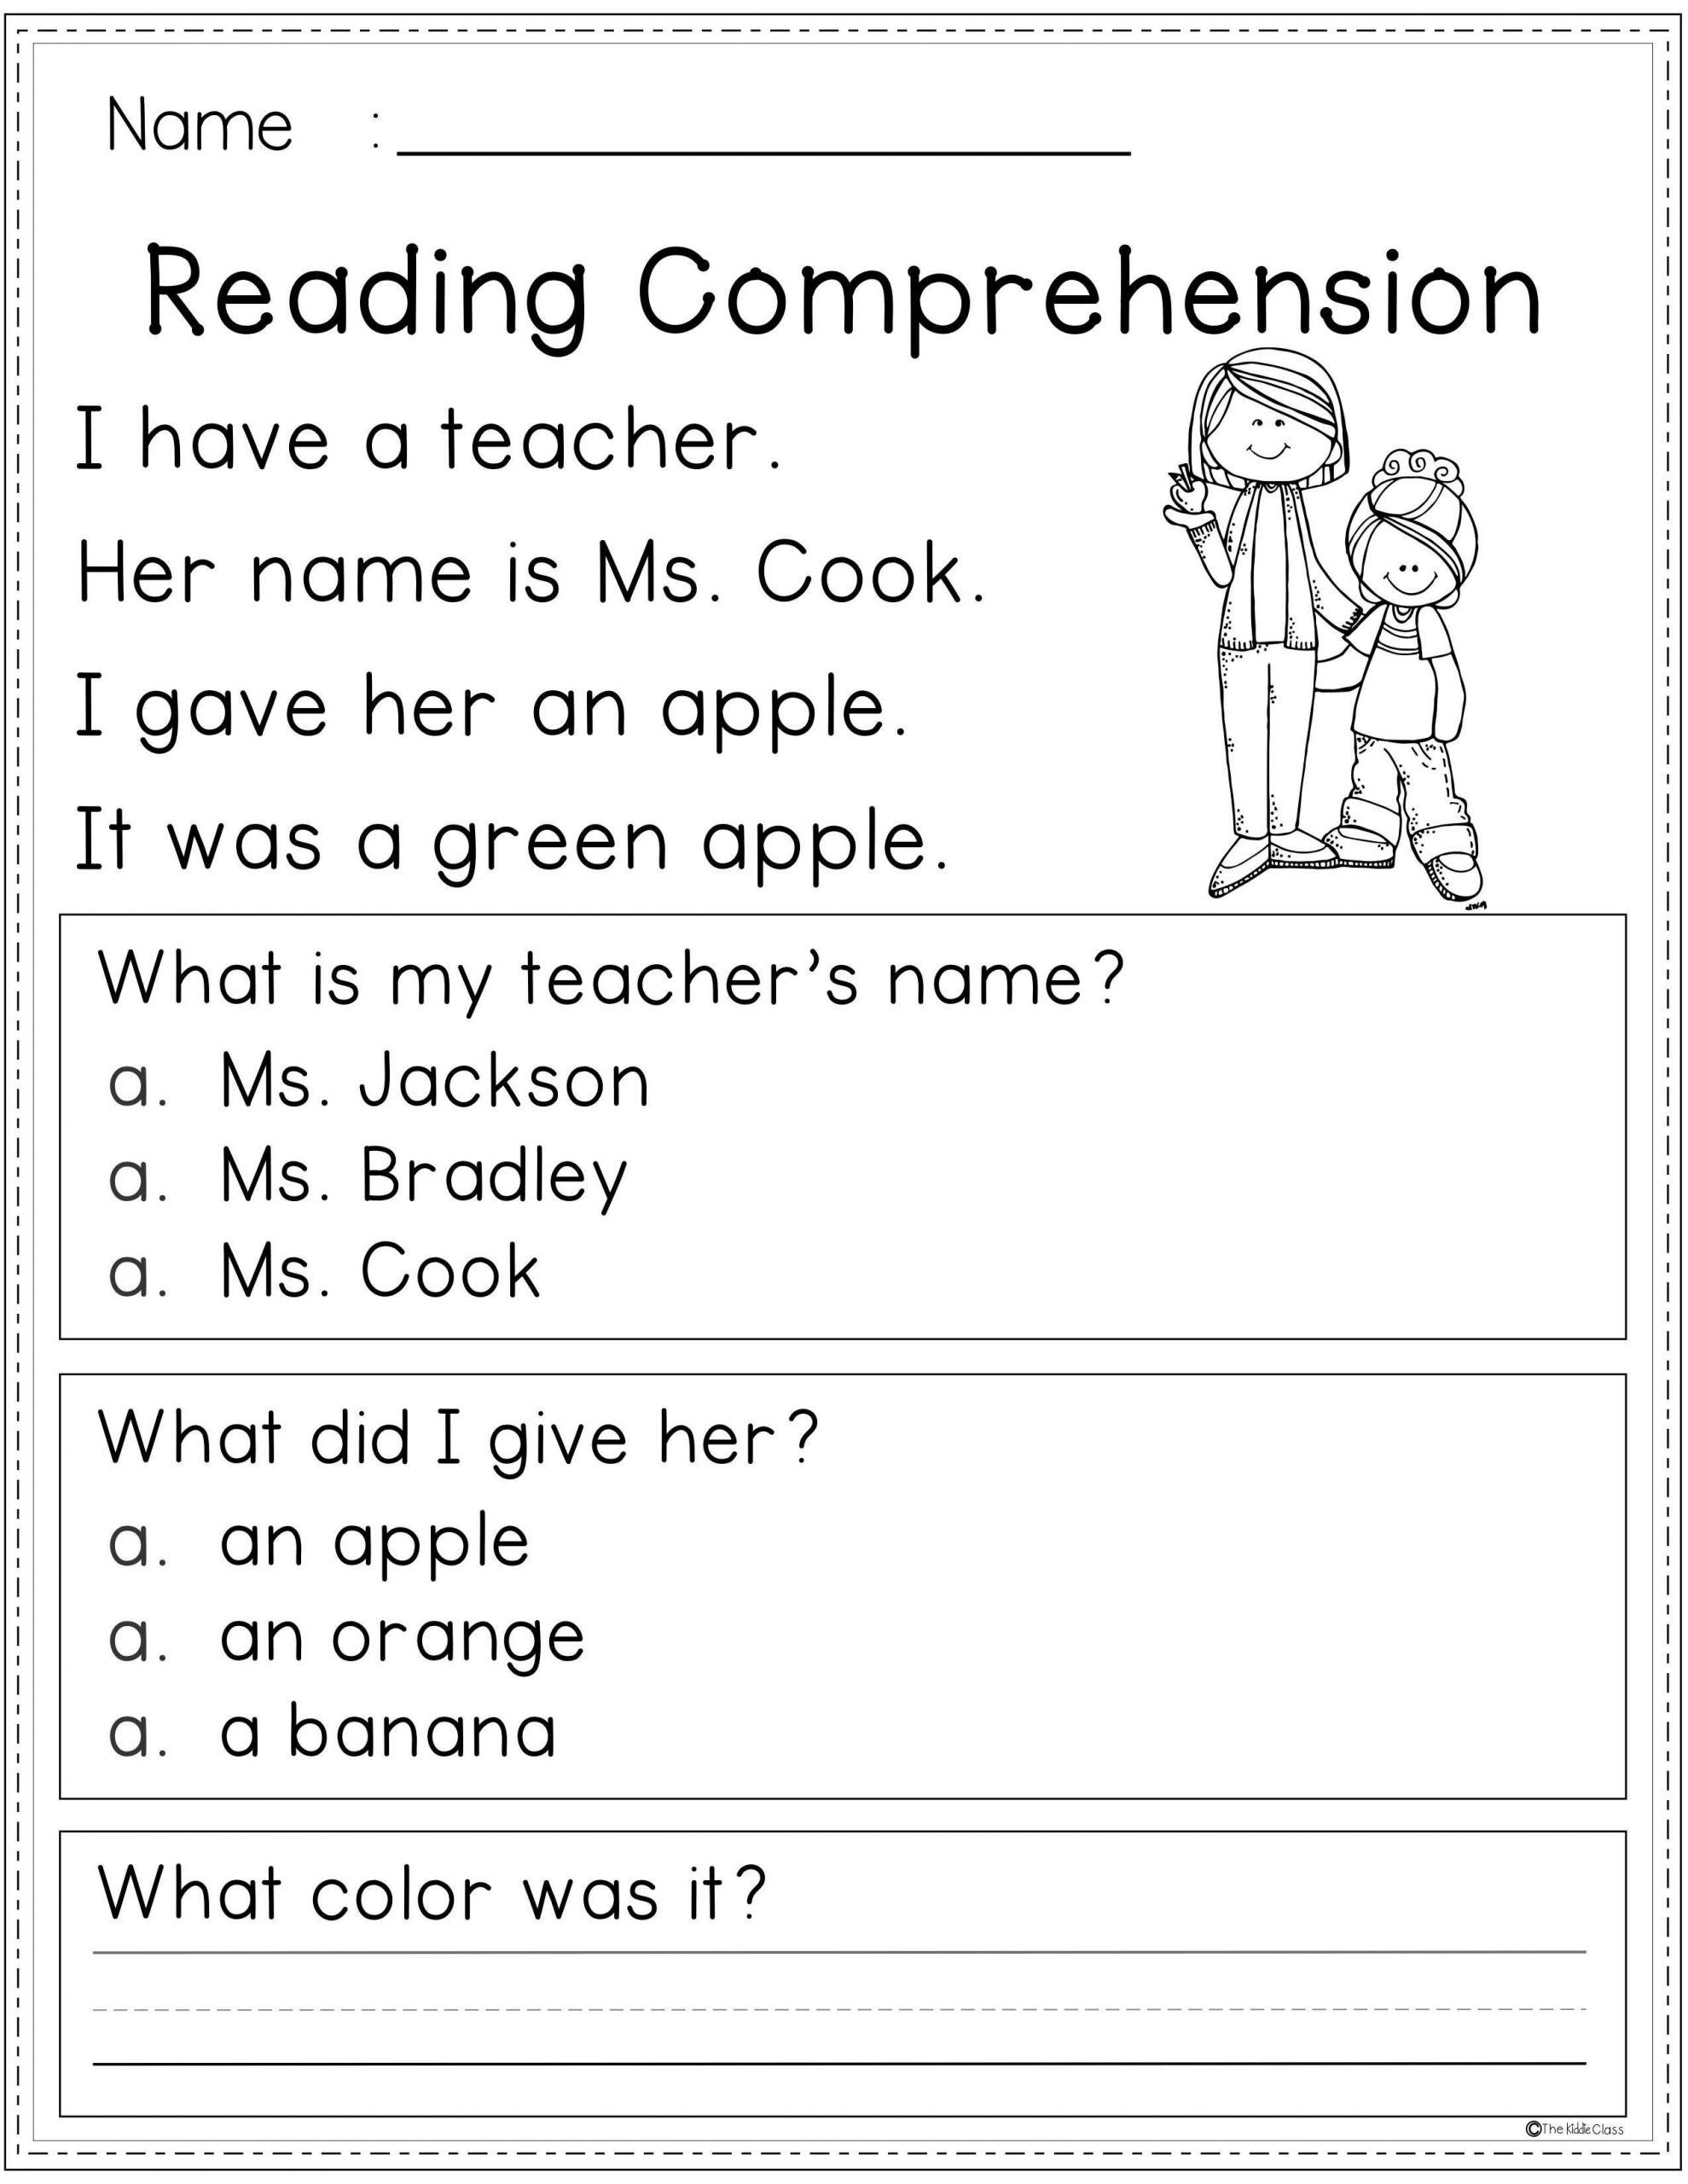 free-printable-reading-passages-reading-comprehension-worksheets